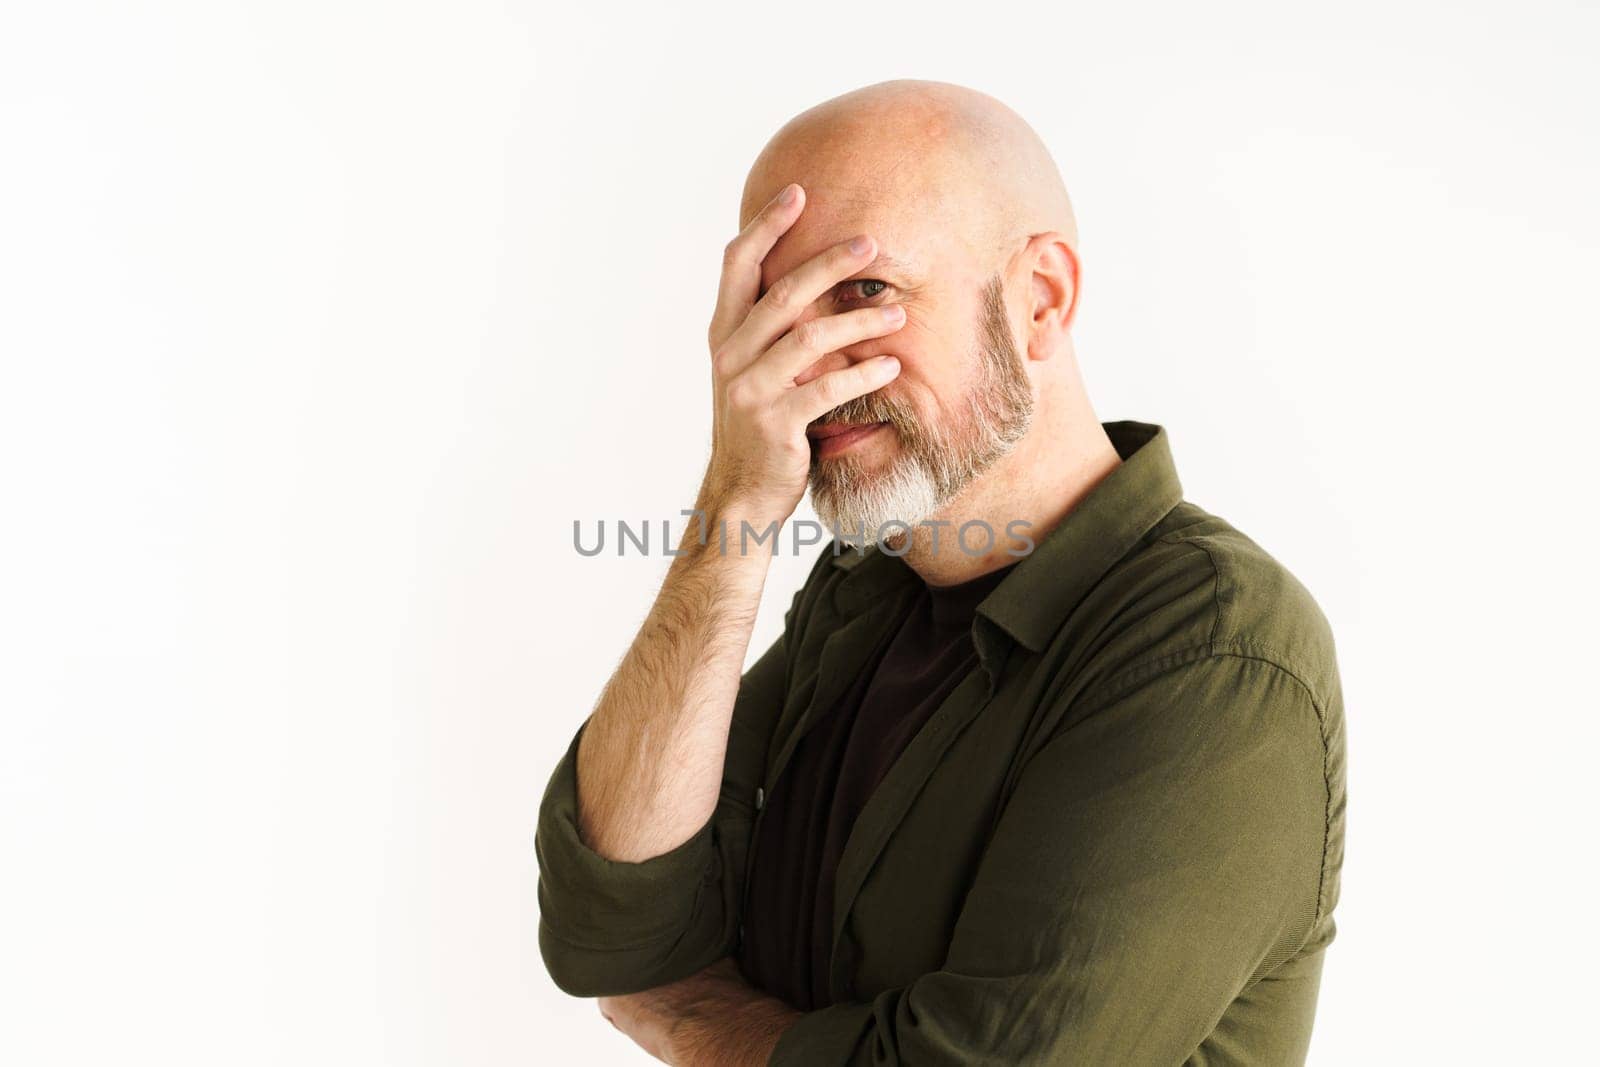 Mature man with silver beard in moment of frustration or disbelief. He puts hand on face in facepalm gesture, conveying sense of sarcasm and exasperation. White background adds emphasis to reaction. by LipikStockMedia